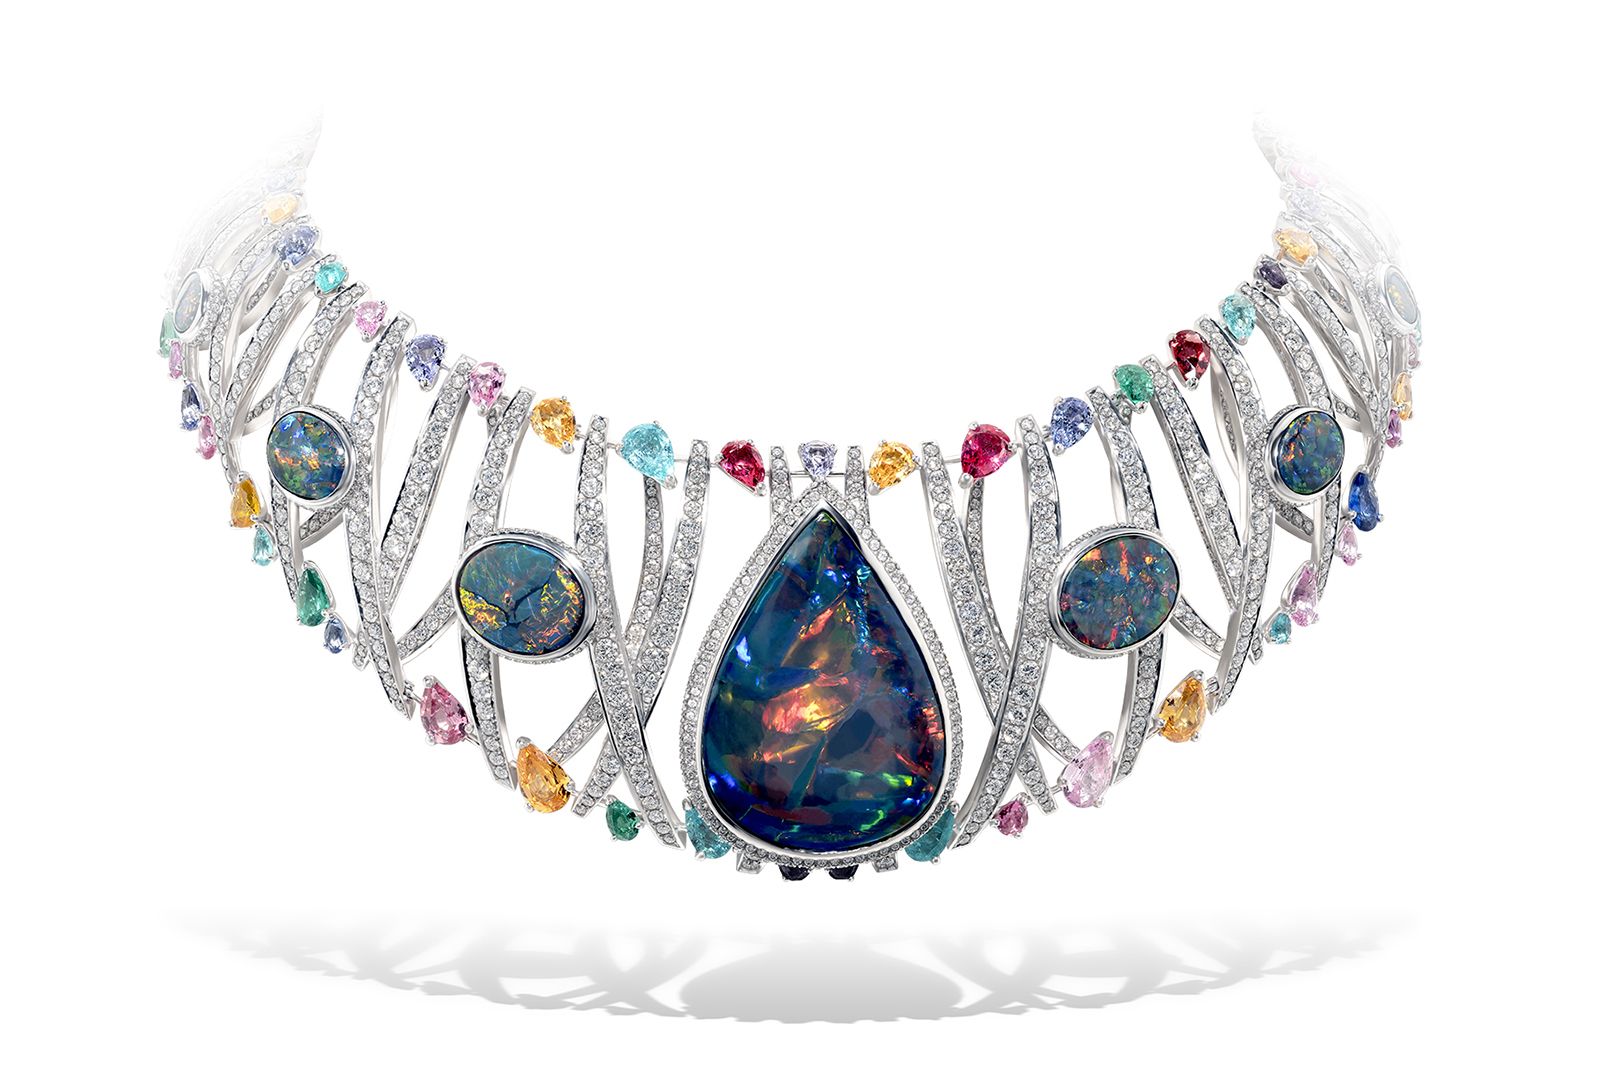 22 of the most dazzling new High Jewellery pieces to covet